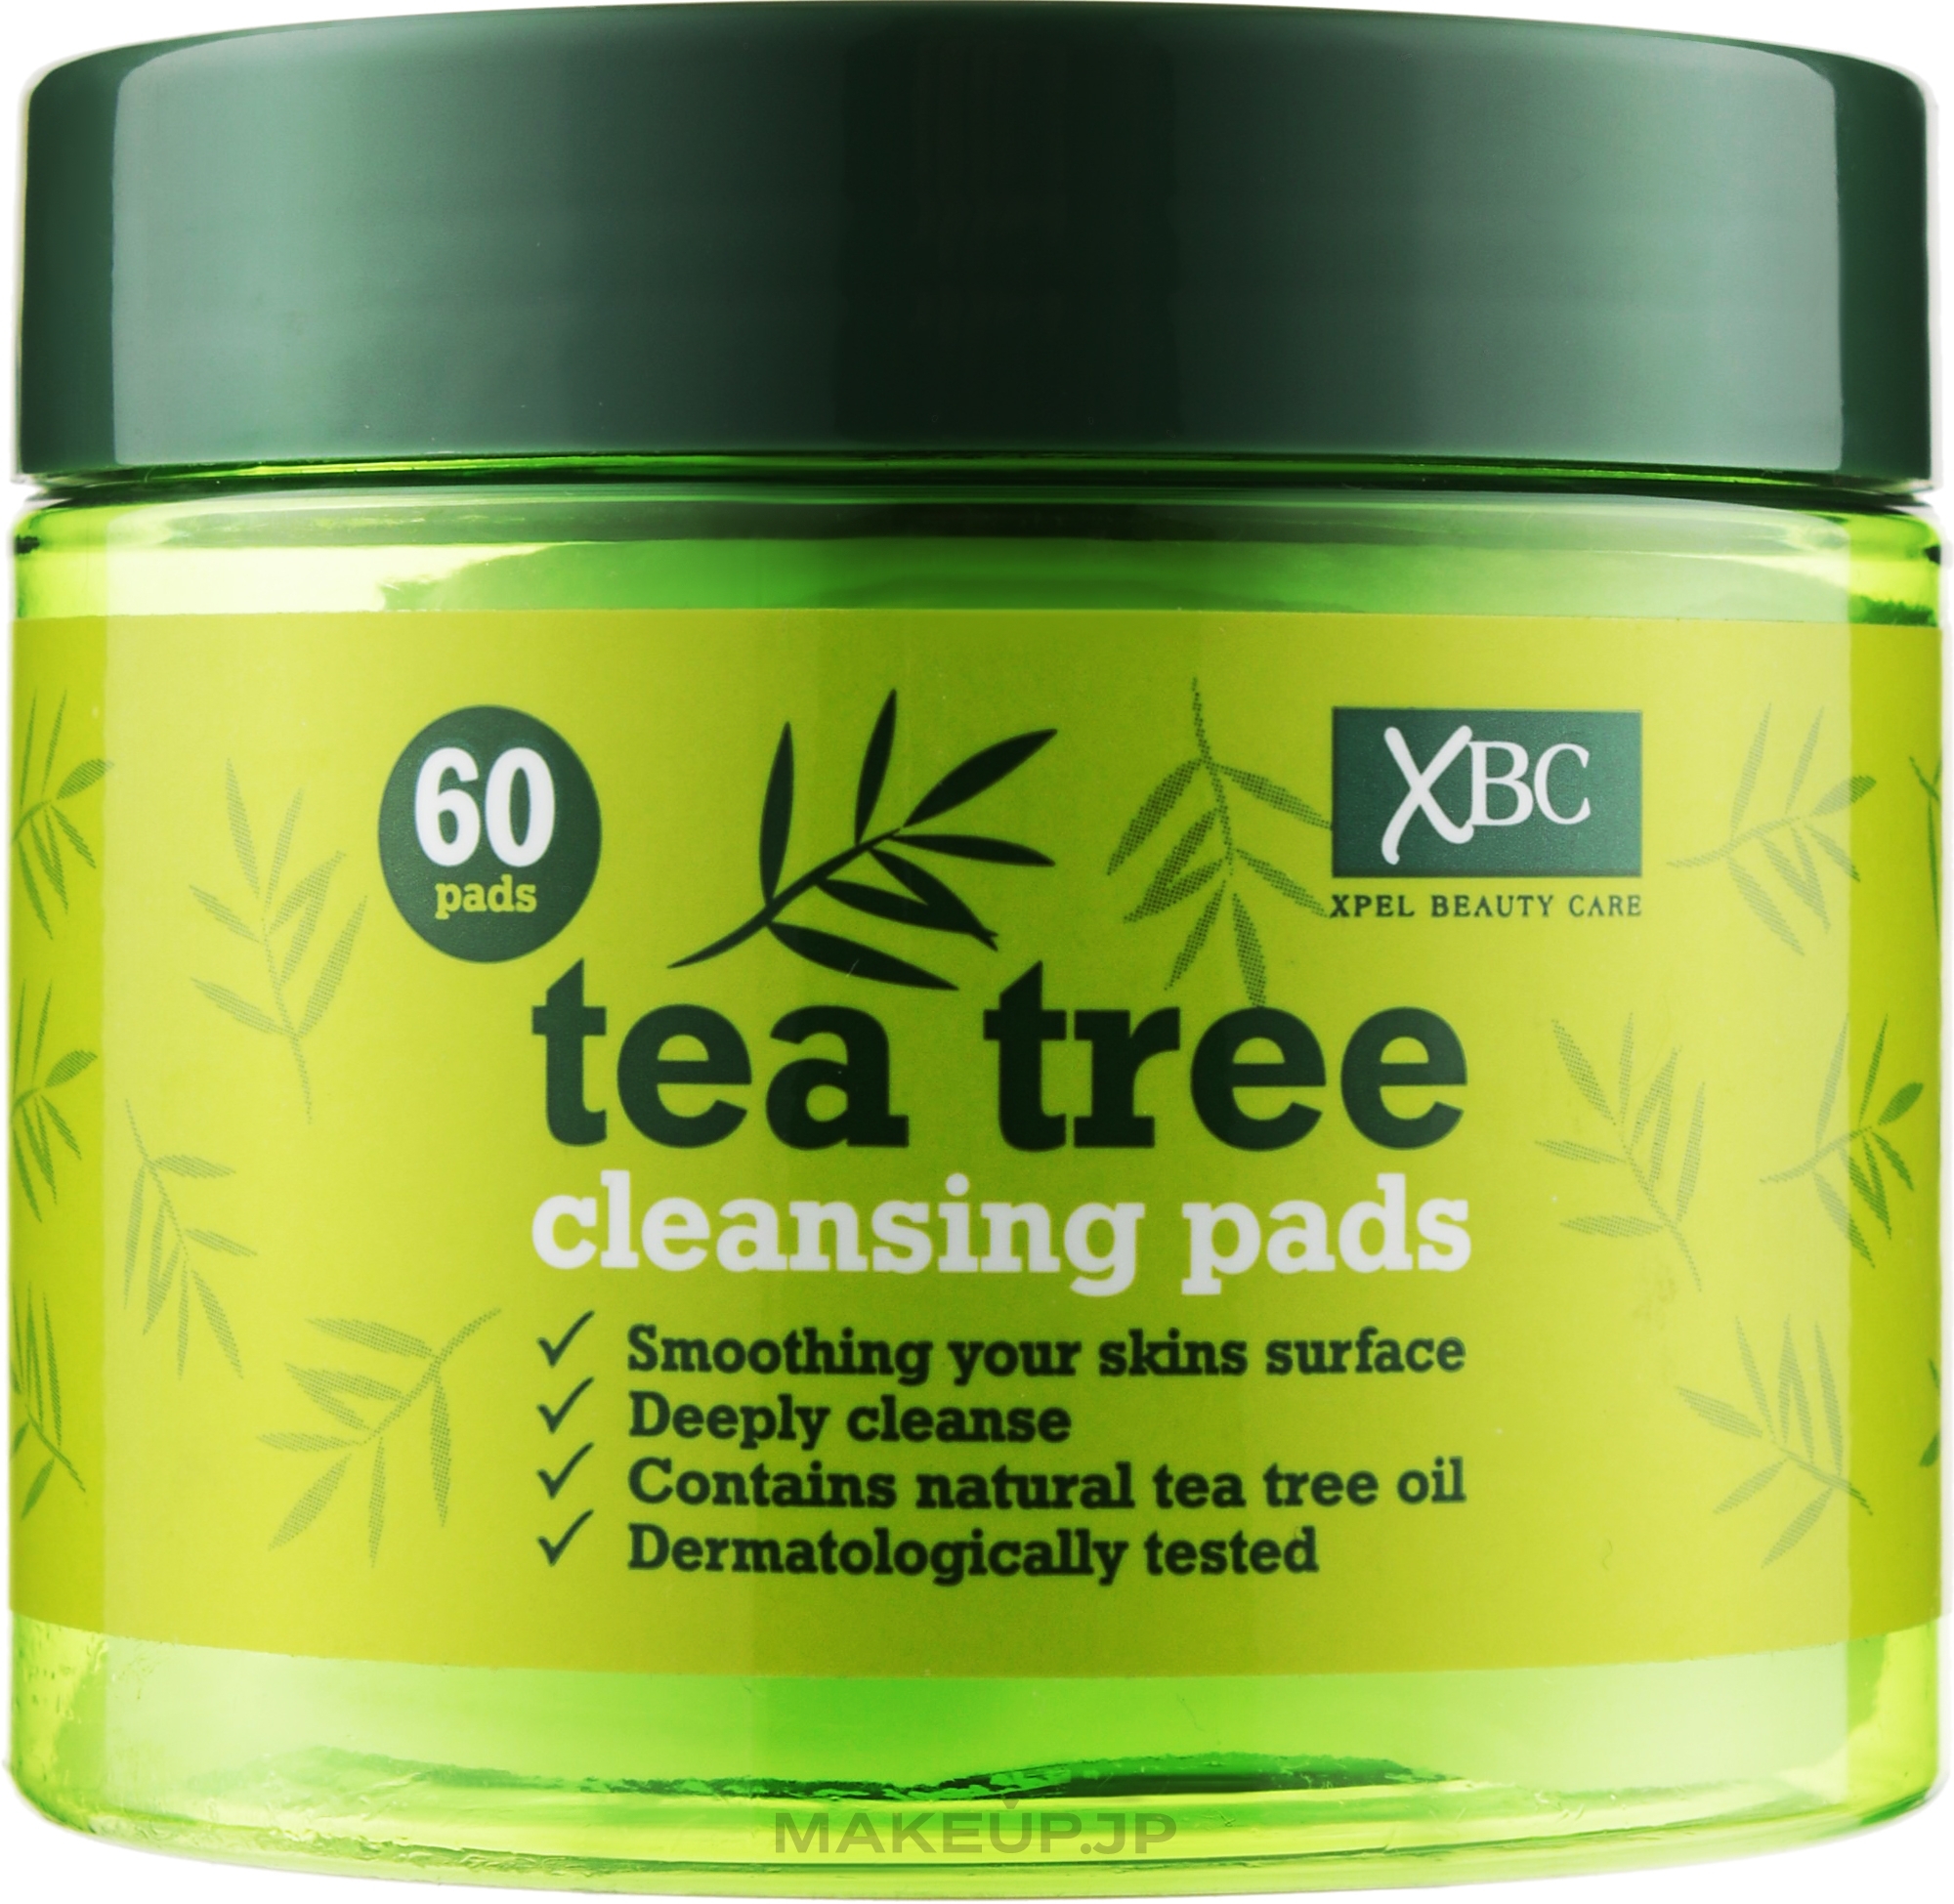 Cleansing Cotton Pads - Xpel Marketing Ltd Tea Tree Cleansing Pads — photo 60 szt.